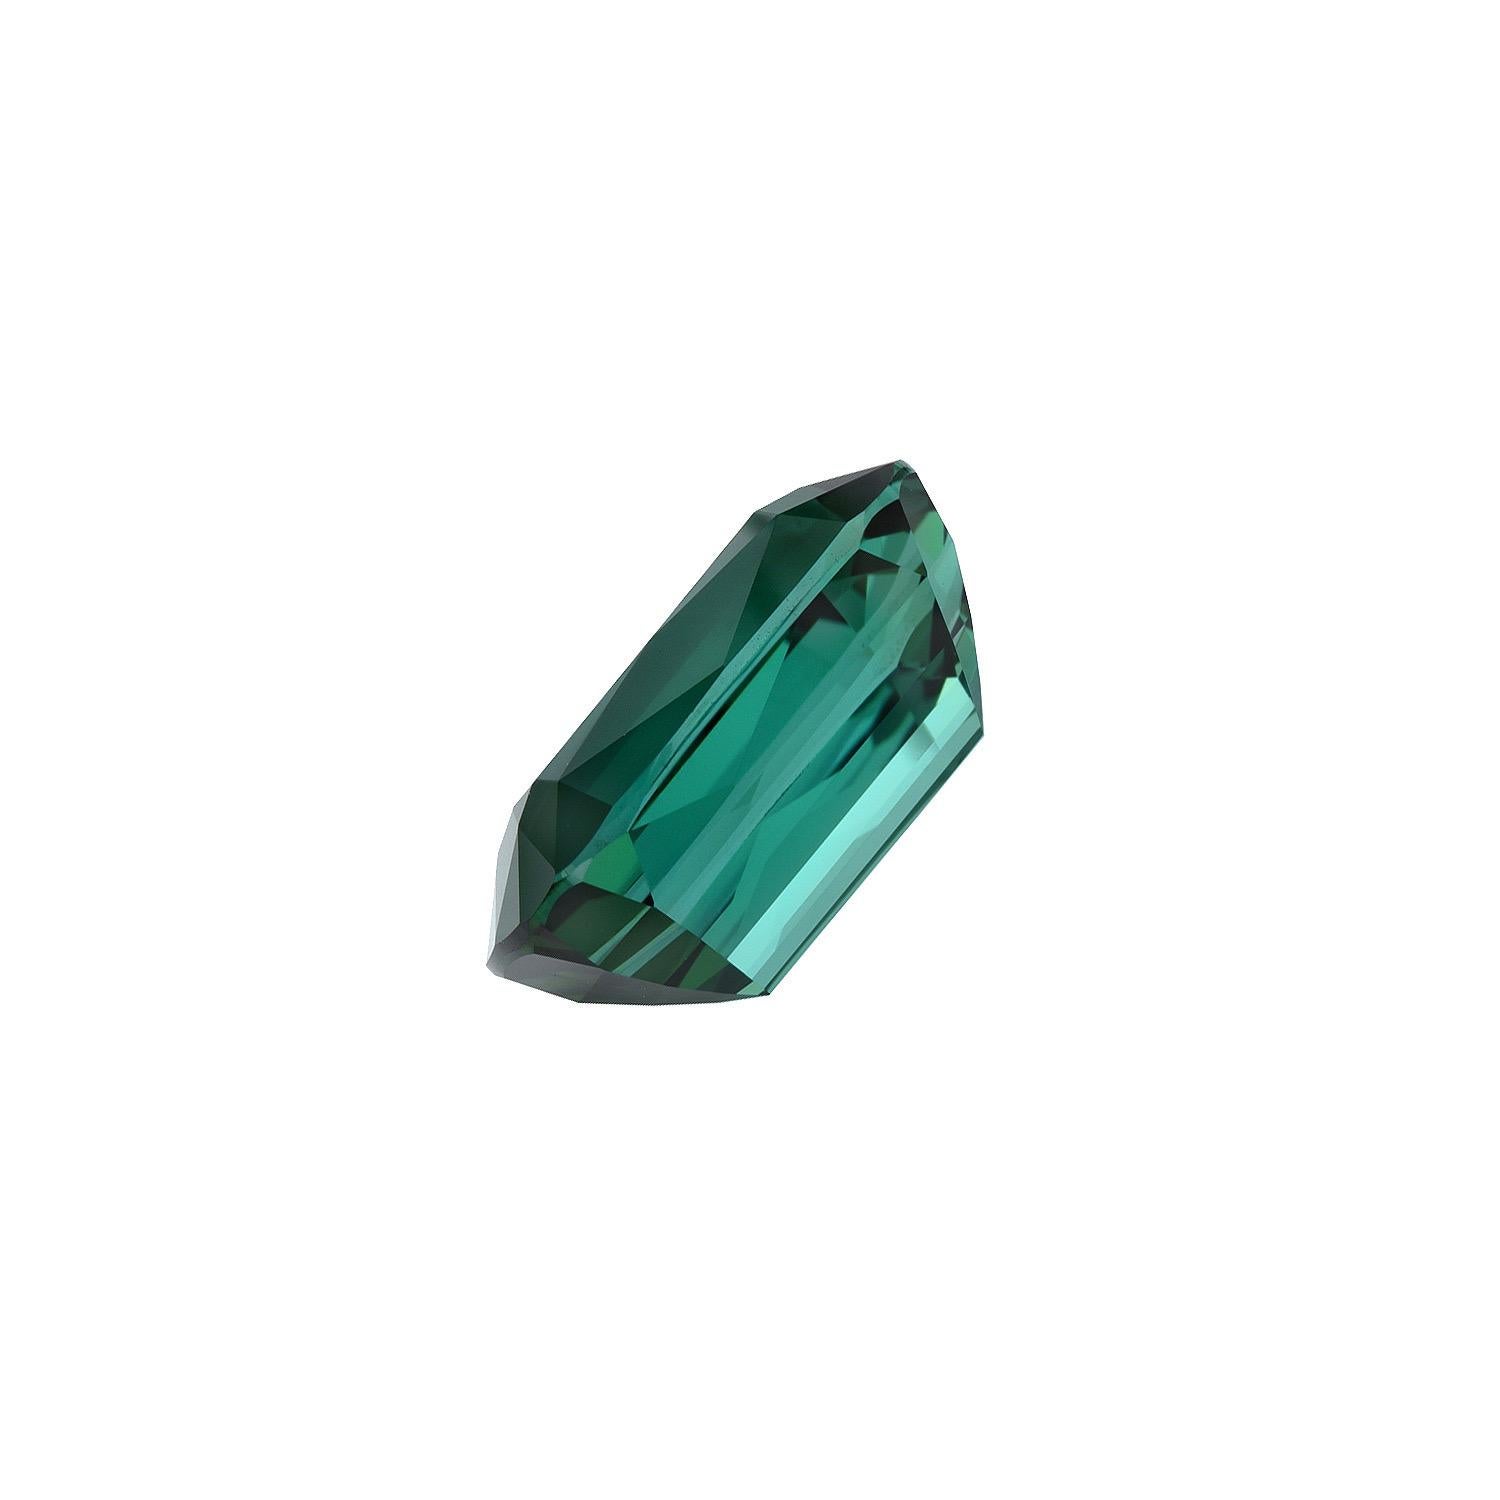 5.05 carat unisex Blue-Green Tourmaline cushion loose gemstone, offered unmounted to someone very special.
Dimensions: 12.6 x 7.8 mm.
Returns are accepted and paid by us within 7 days of delivery.
We offer supreme custom jewelry work upon request.